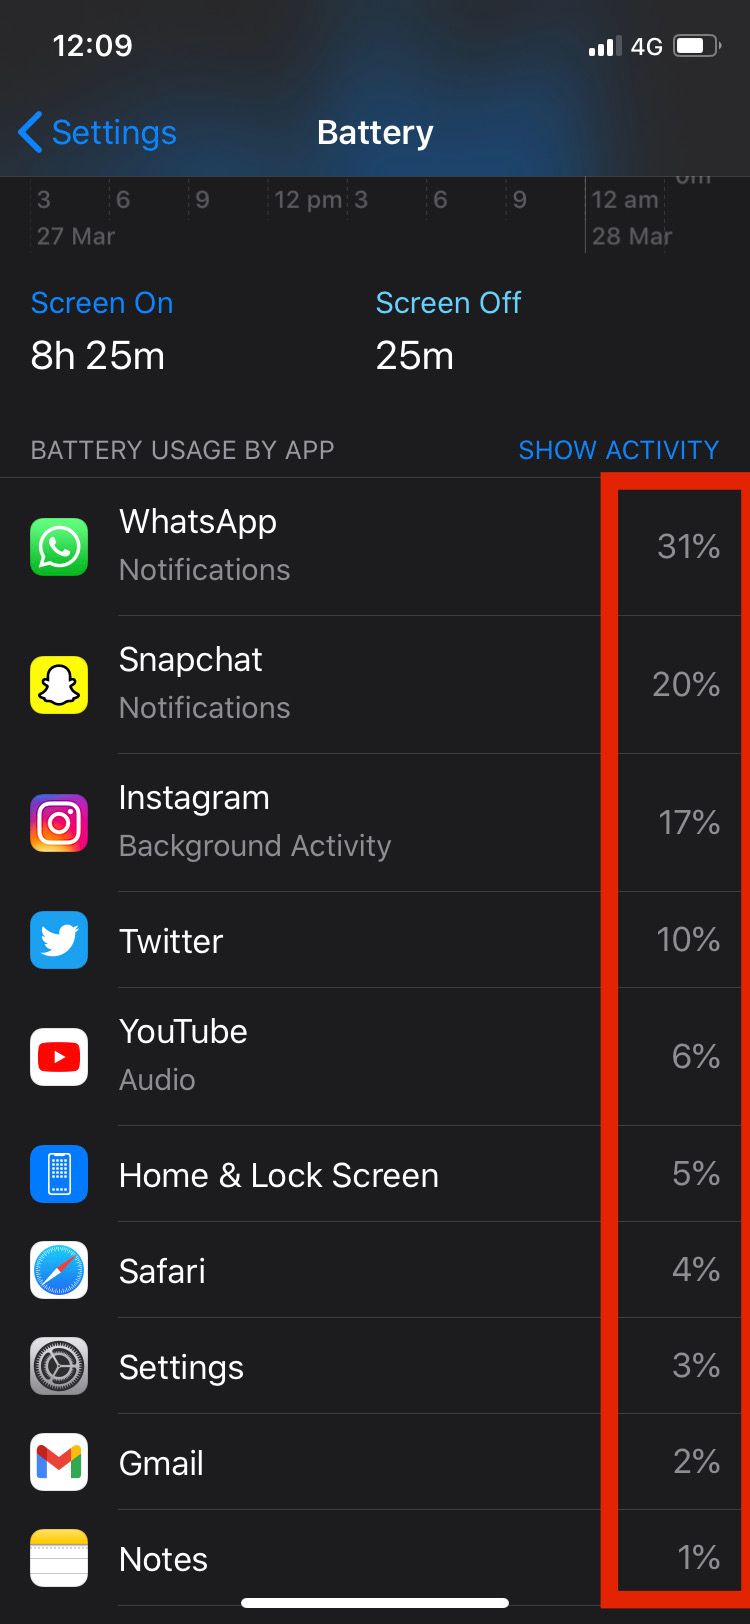 Battery usage activity in percentages